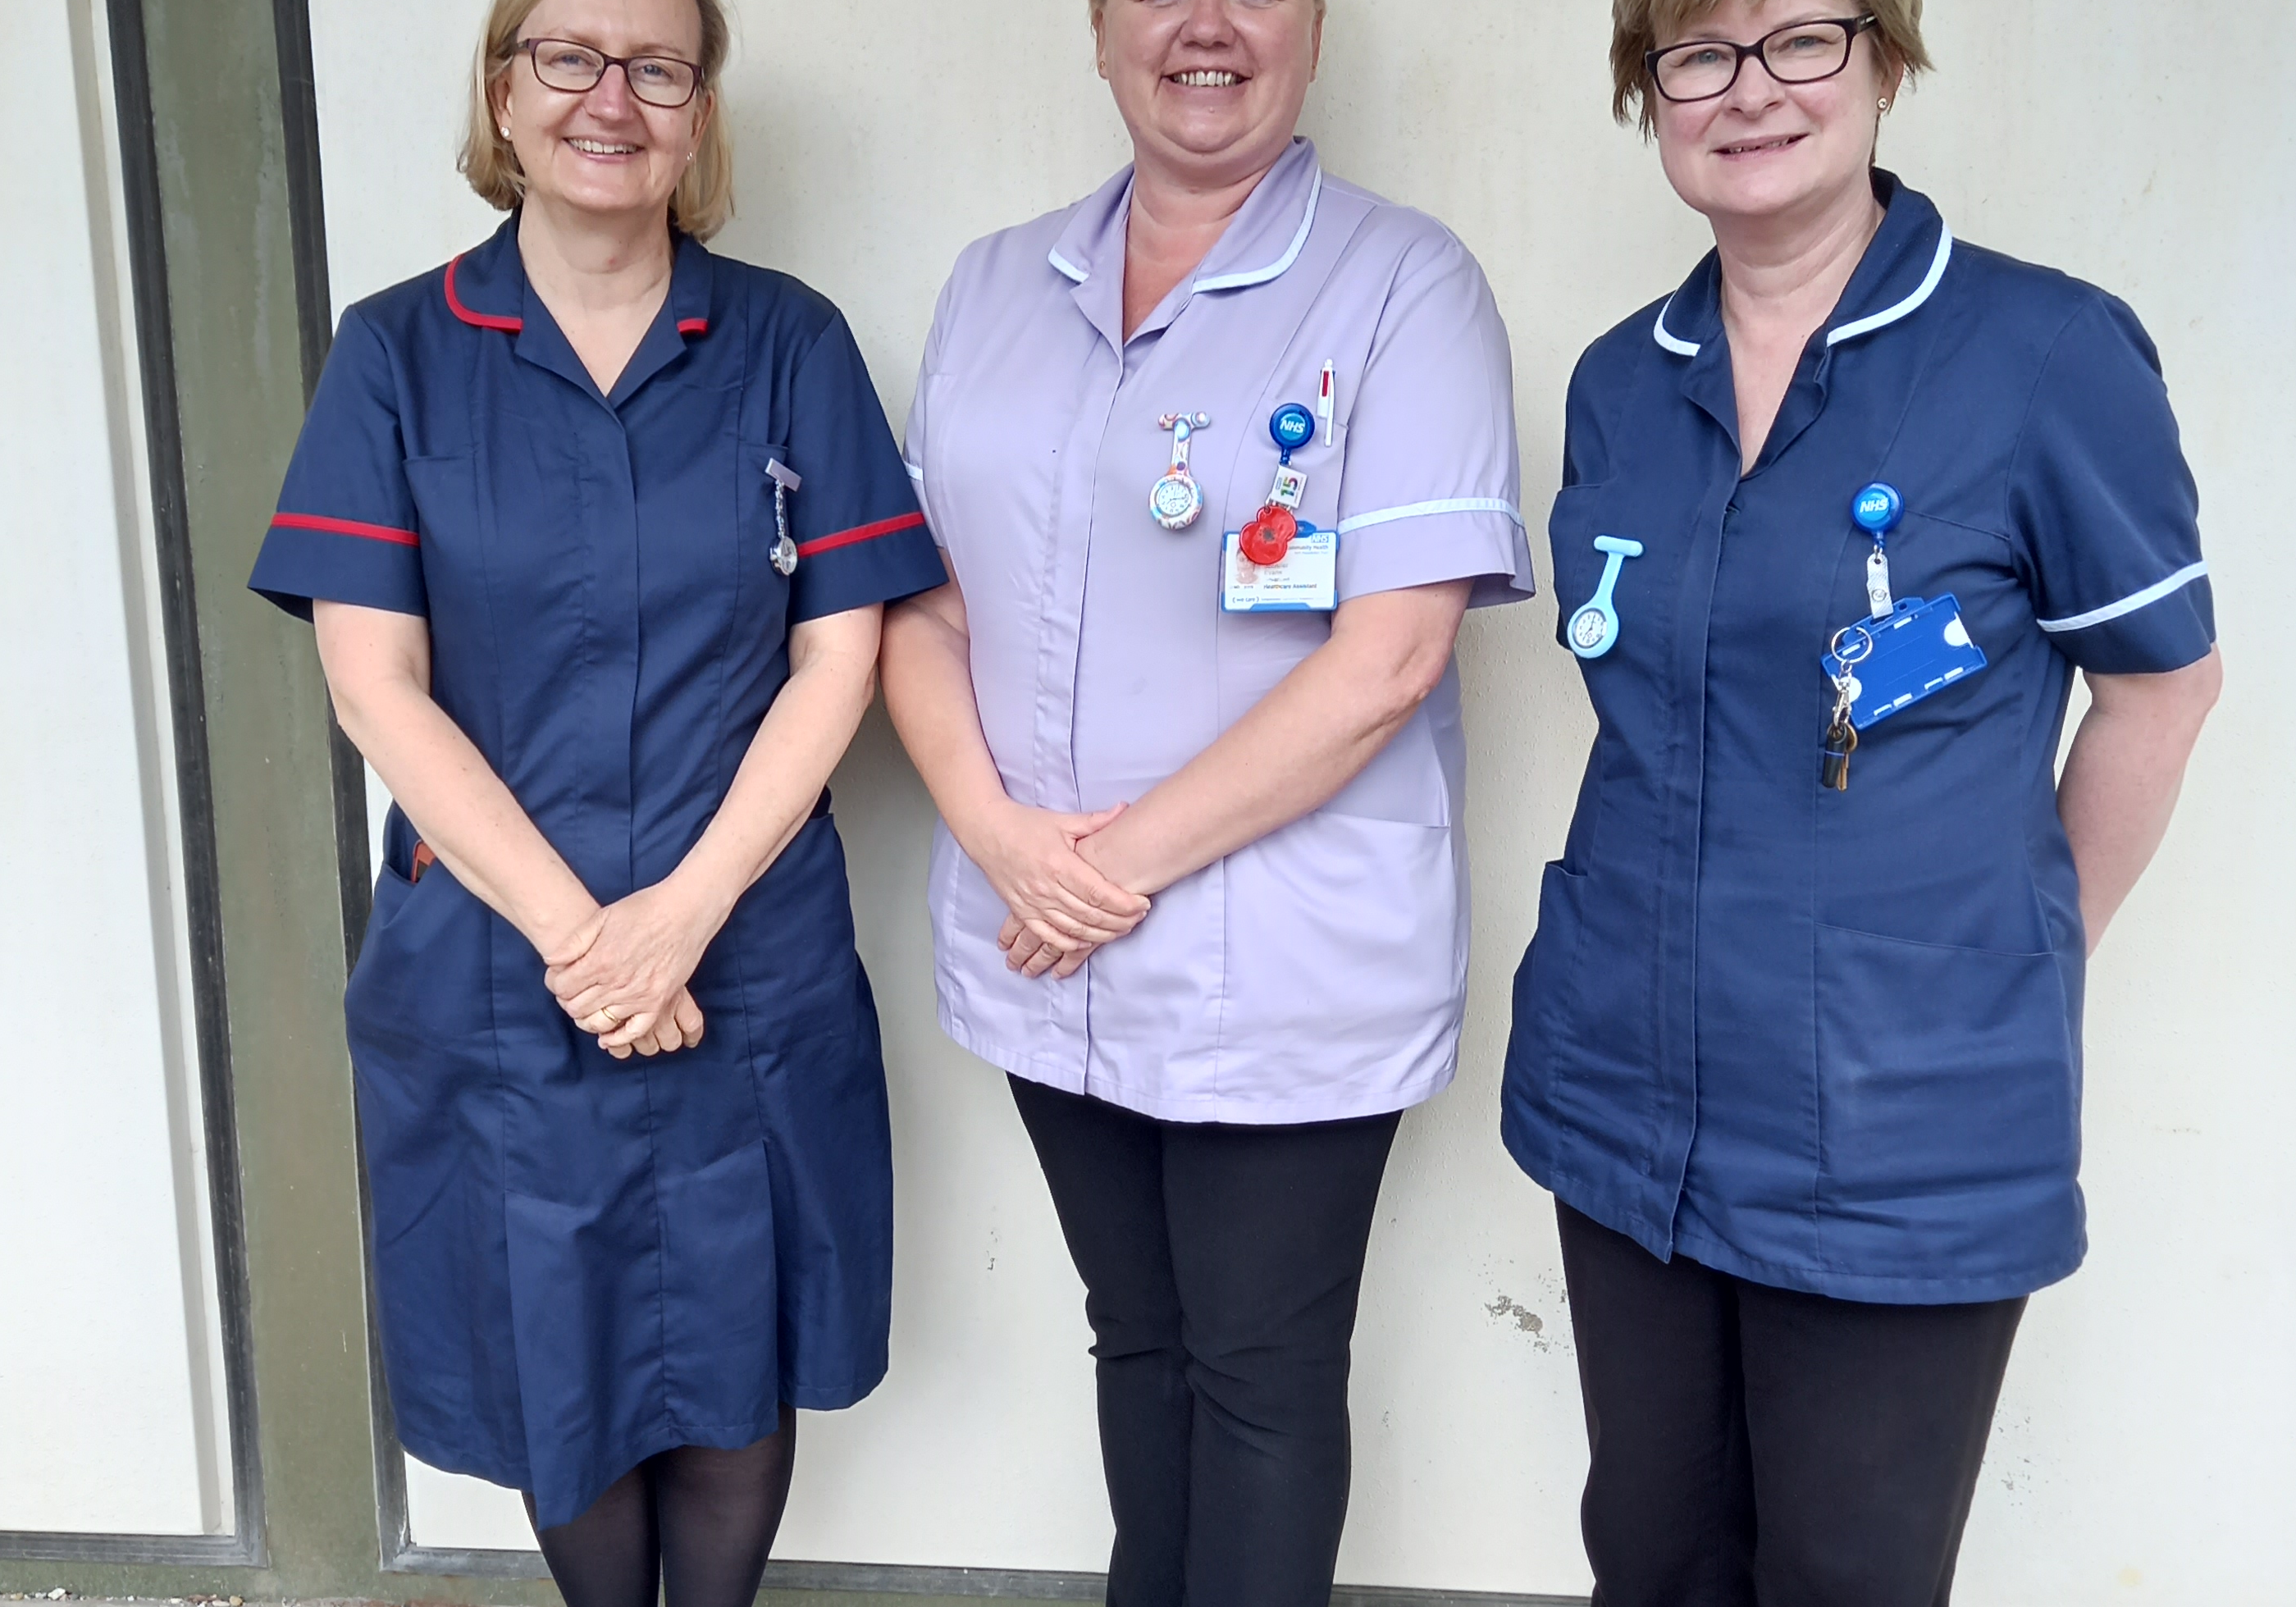 The continence in care homes project team